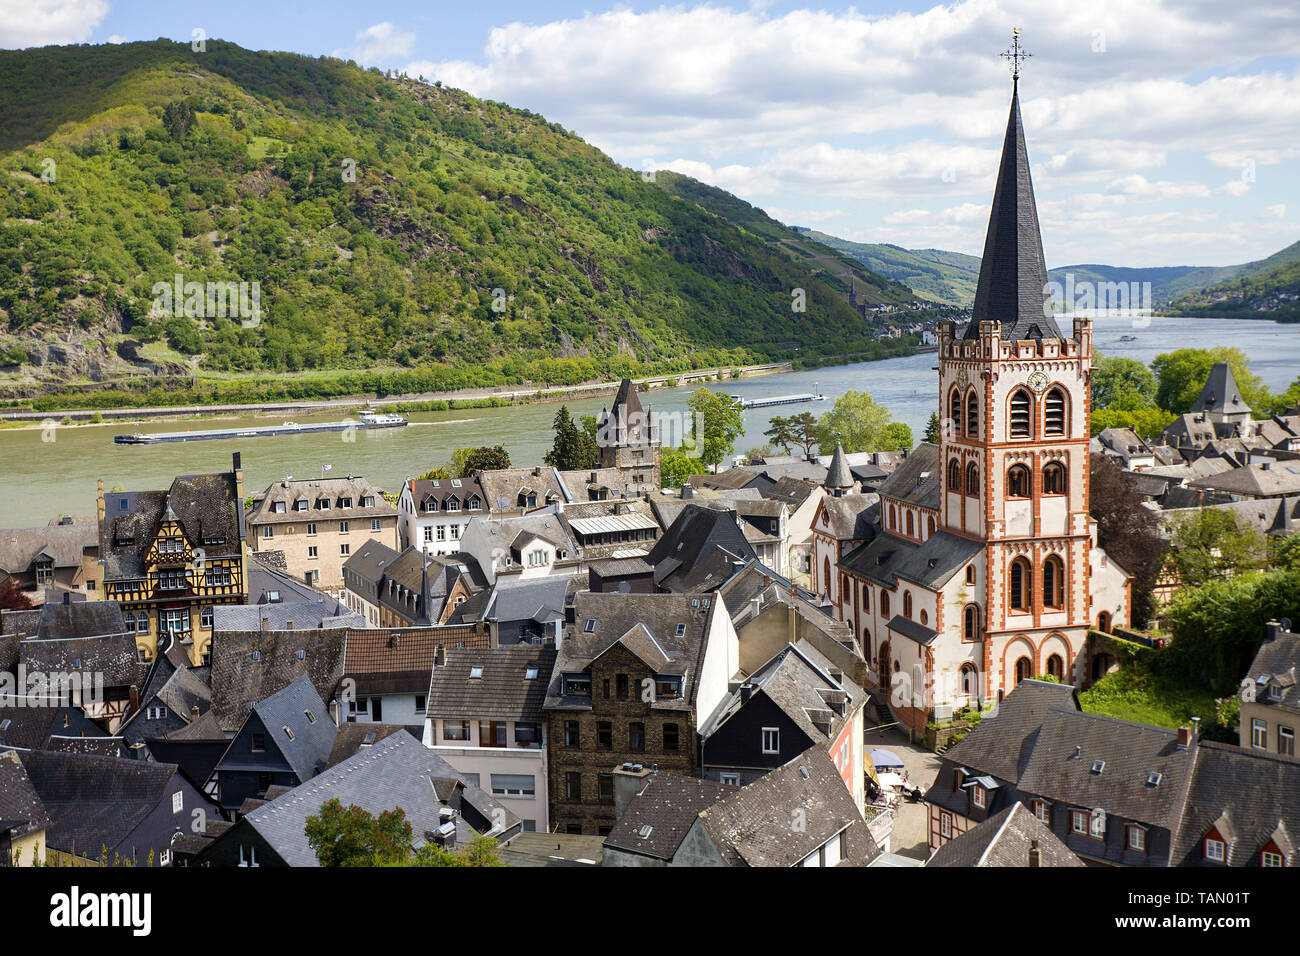 View from the view tower 'Postenturm' on Bacharach with Saint Peter church, Upper Middle Rhine Valley, Rhineland-Palatinate, Germany Stock Photo